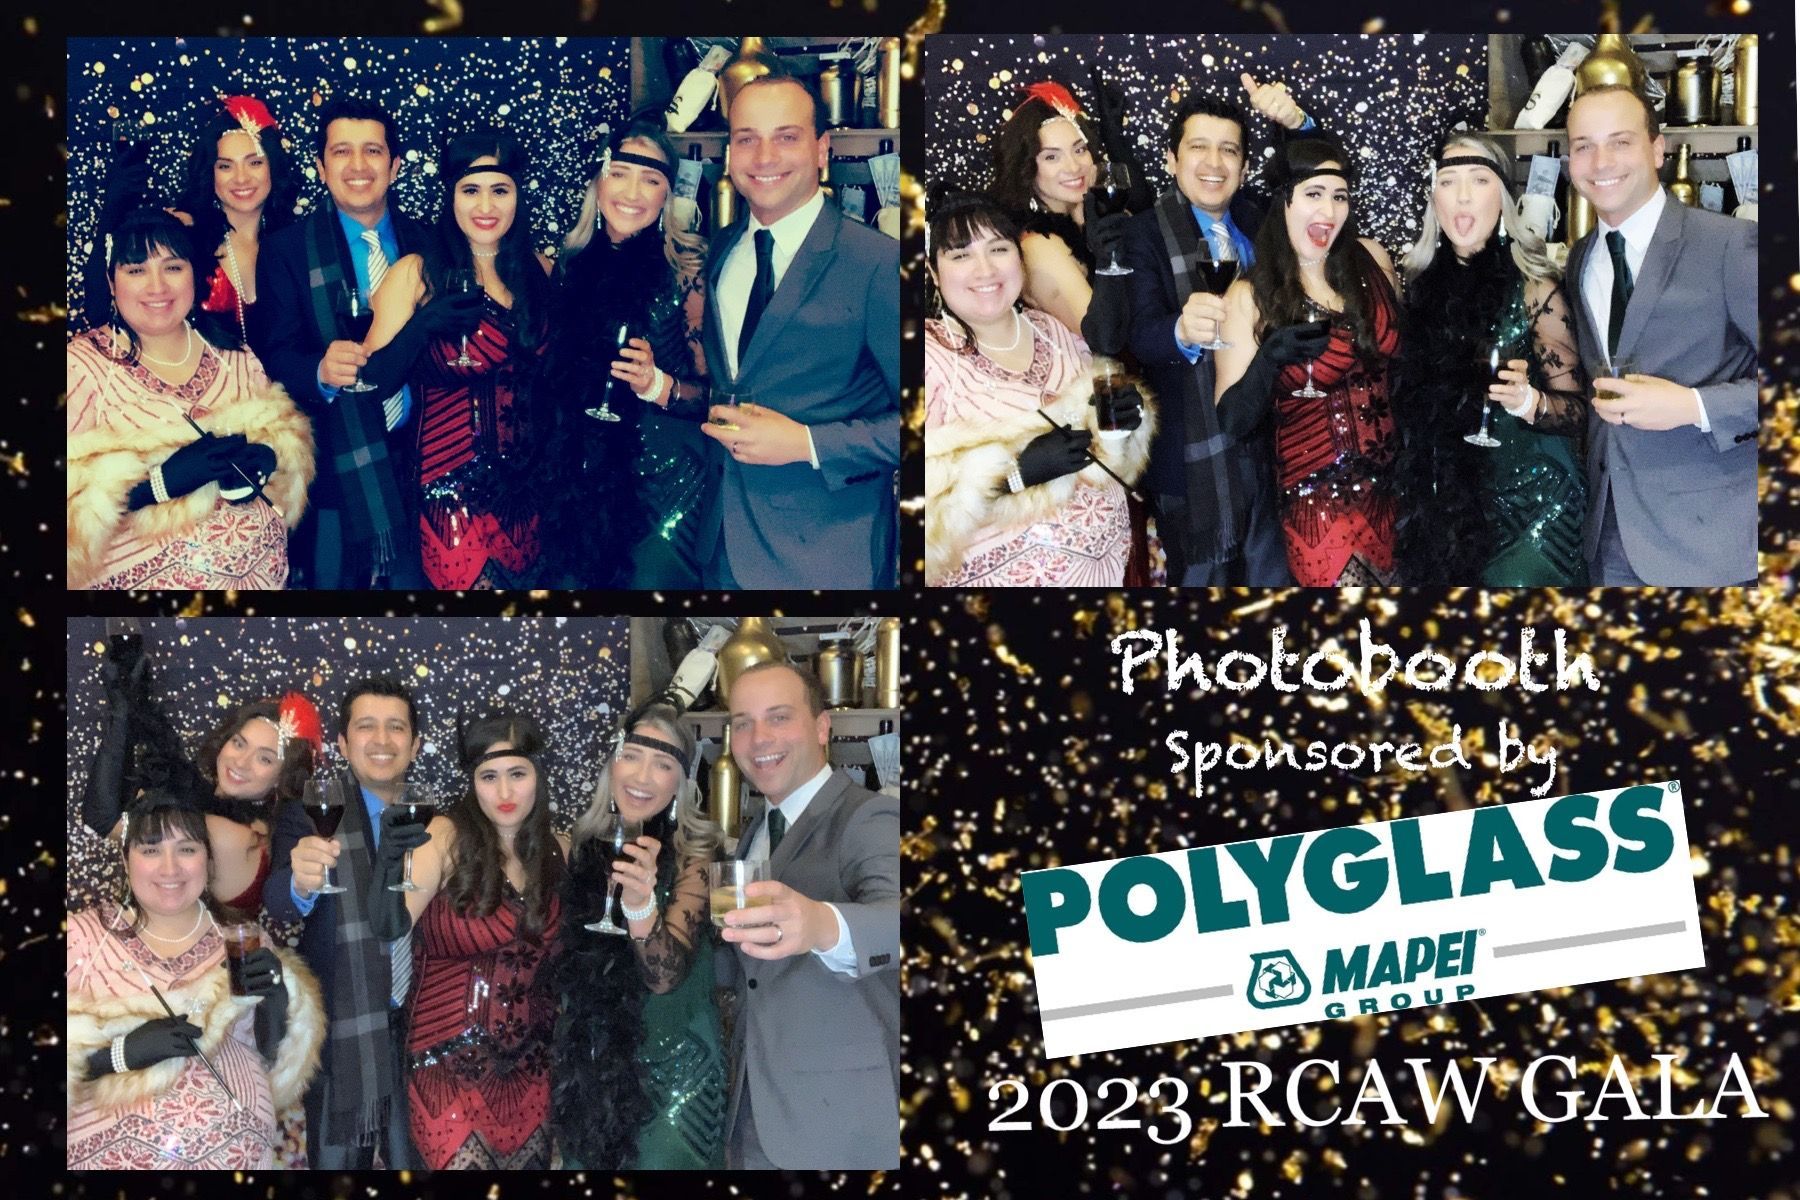 a photo booth sponsored by polyglass for the 2023 rcaw gala